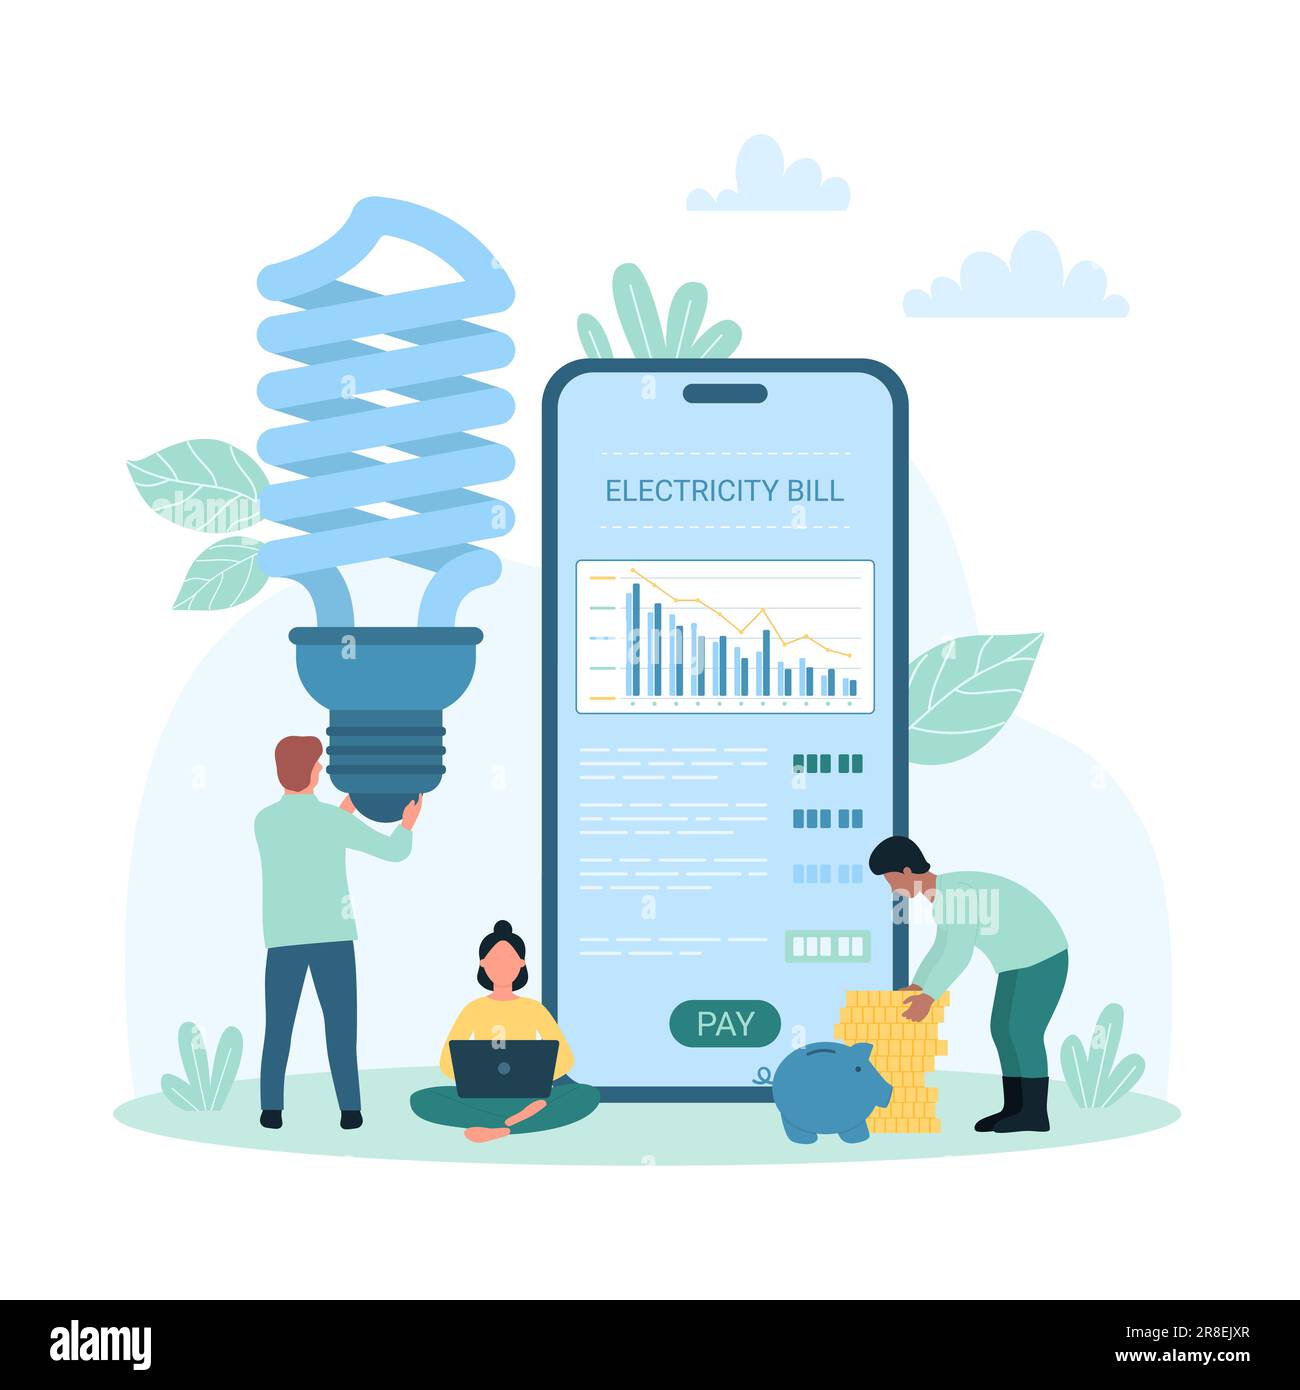 Save electricity and money vector illustration. Cartoon tiny people using CFL light bulb at home to reduce electricity consumption, account interface with electricity bill down on phone screen Stock Vector